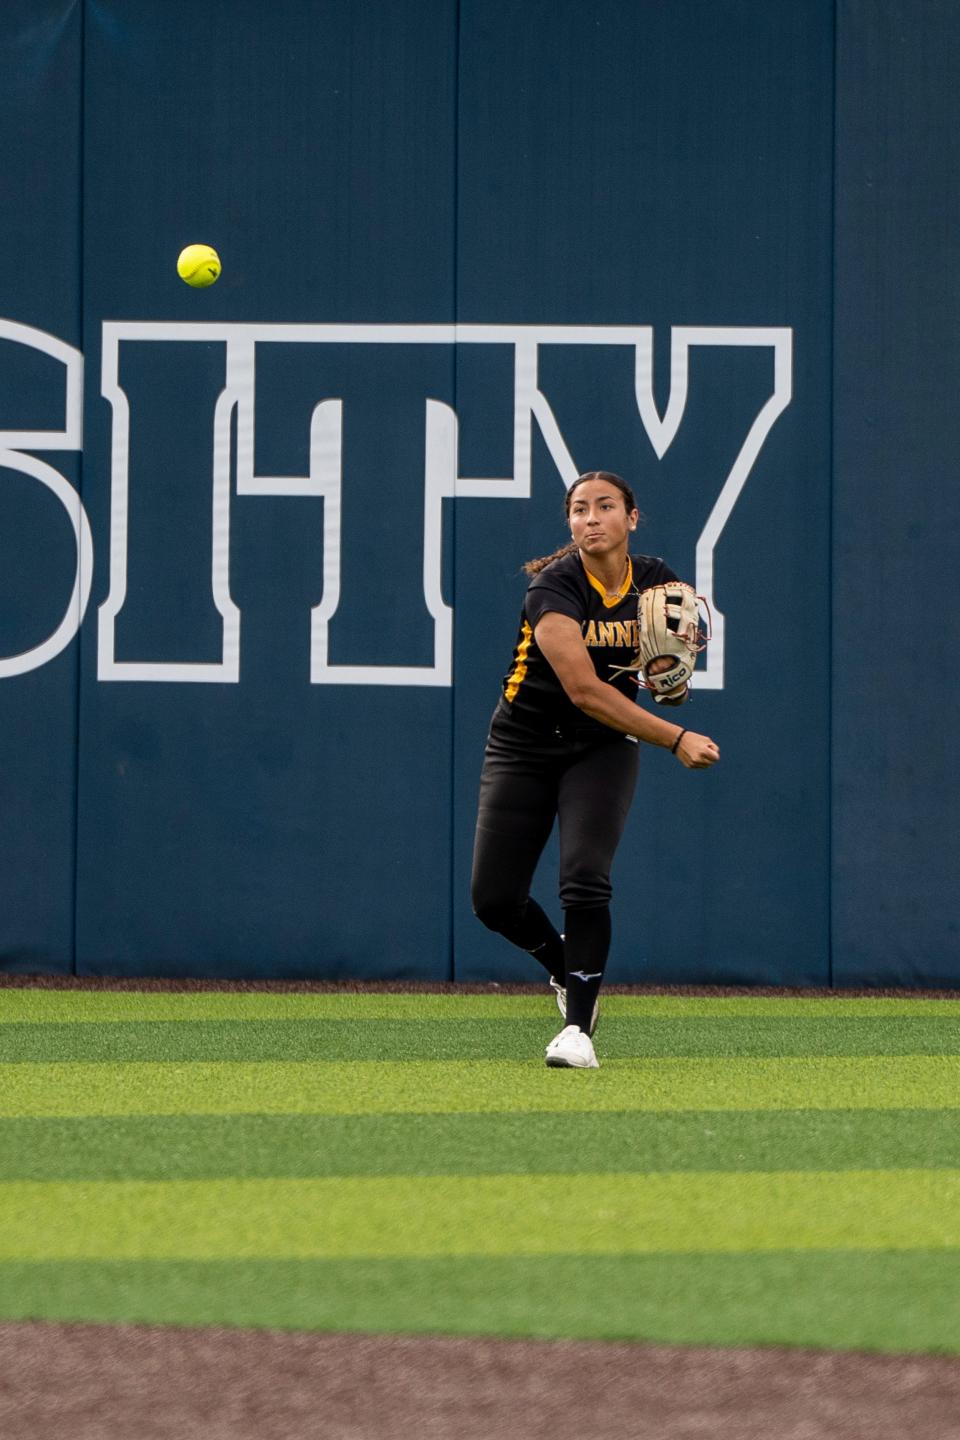 Mount St. Dominic takes on St. John Vianney in the softball state finals at Kean University in Union, NJ on Friday, June 9, 2023. SJV #12 Giuliana Cardin throws the ball. 